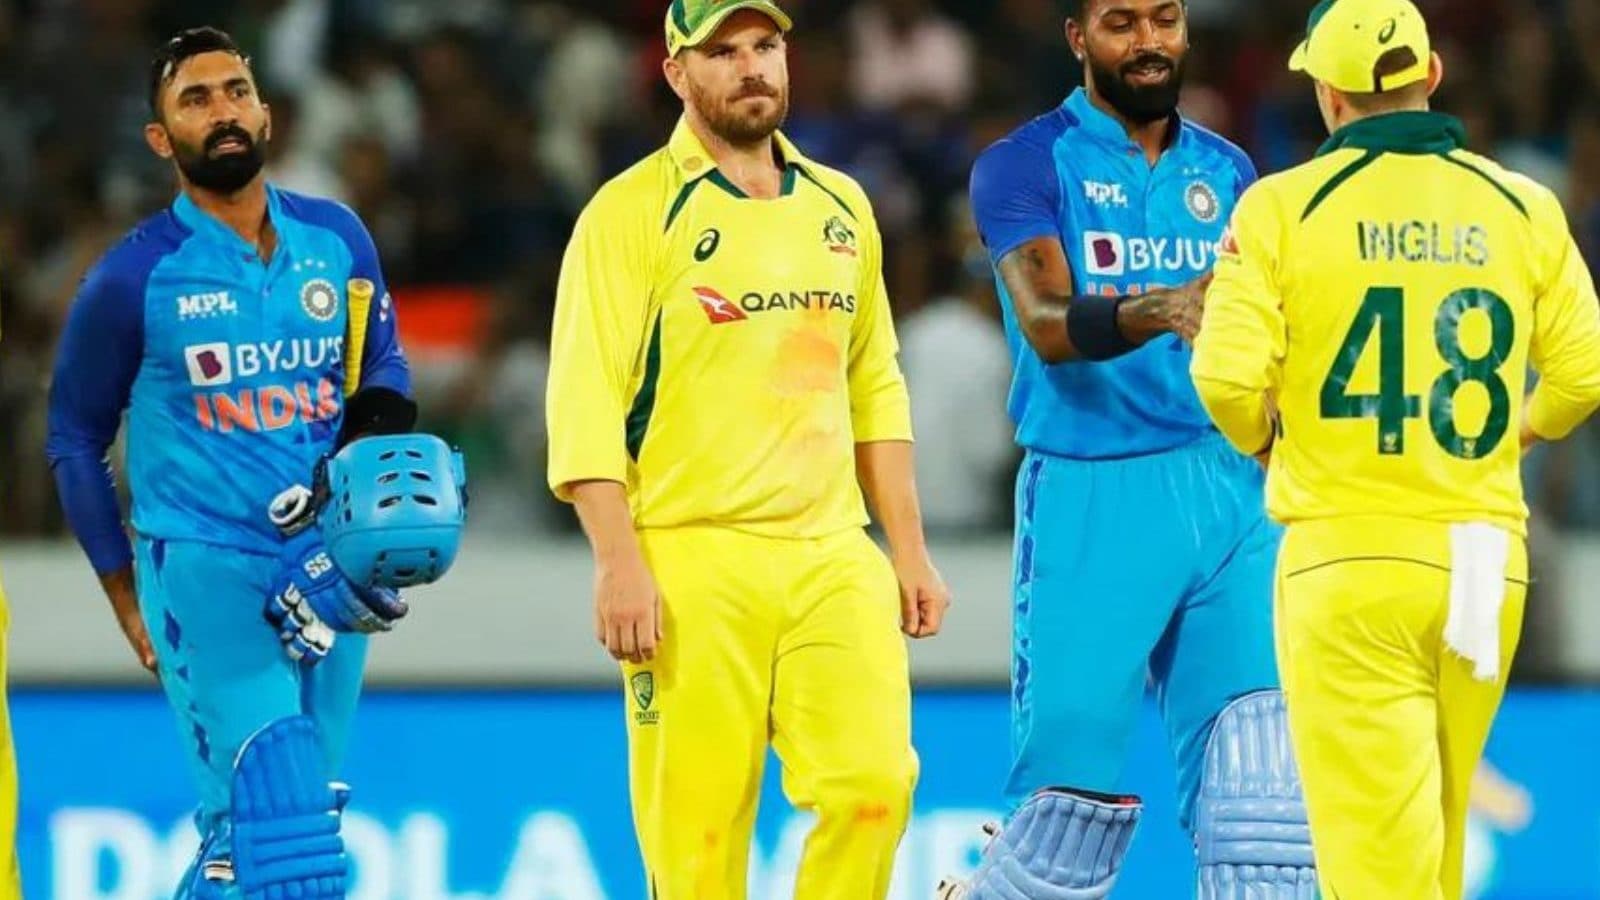 IND vs AUS Highlights, T20 World Cup 2022 Warm-up Match Mohammad Shami Wins it for India After KL Rahul, Suryakumar Yadav Fifties